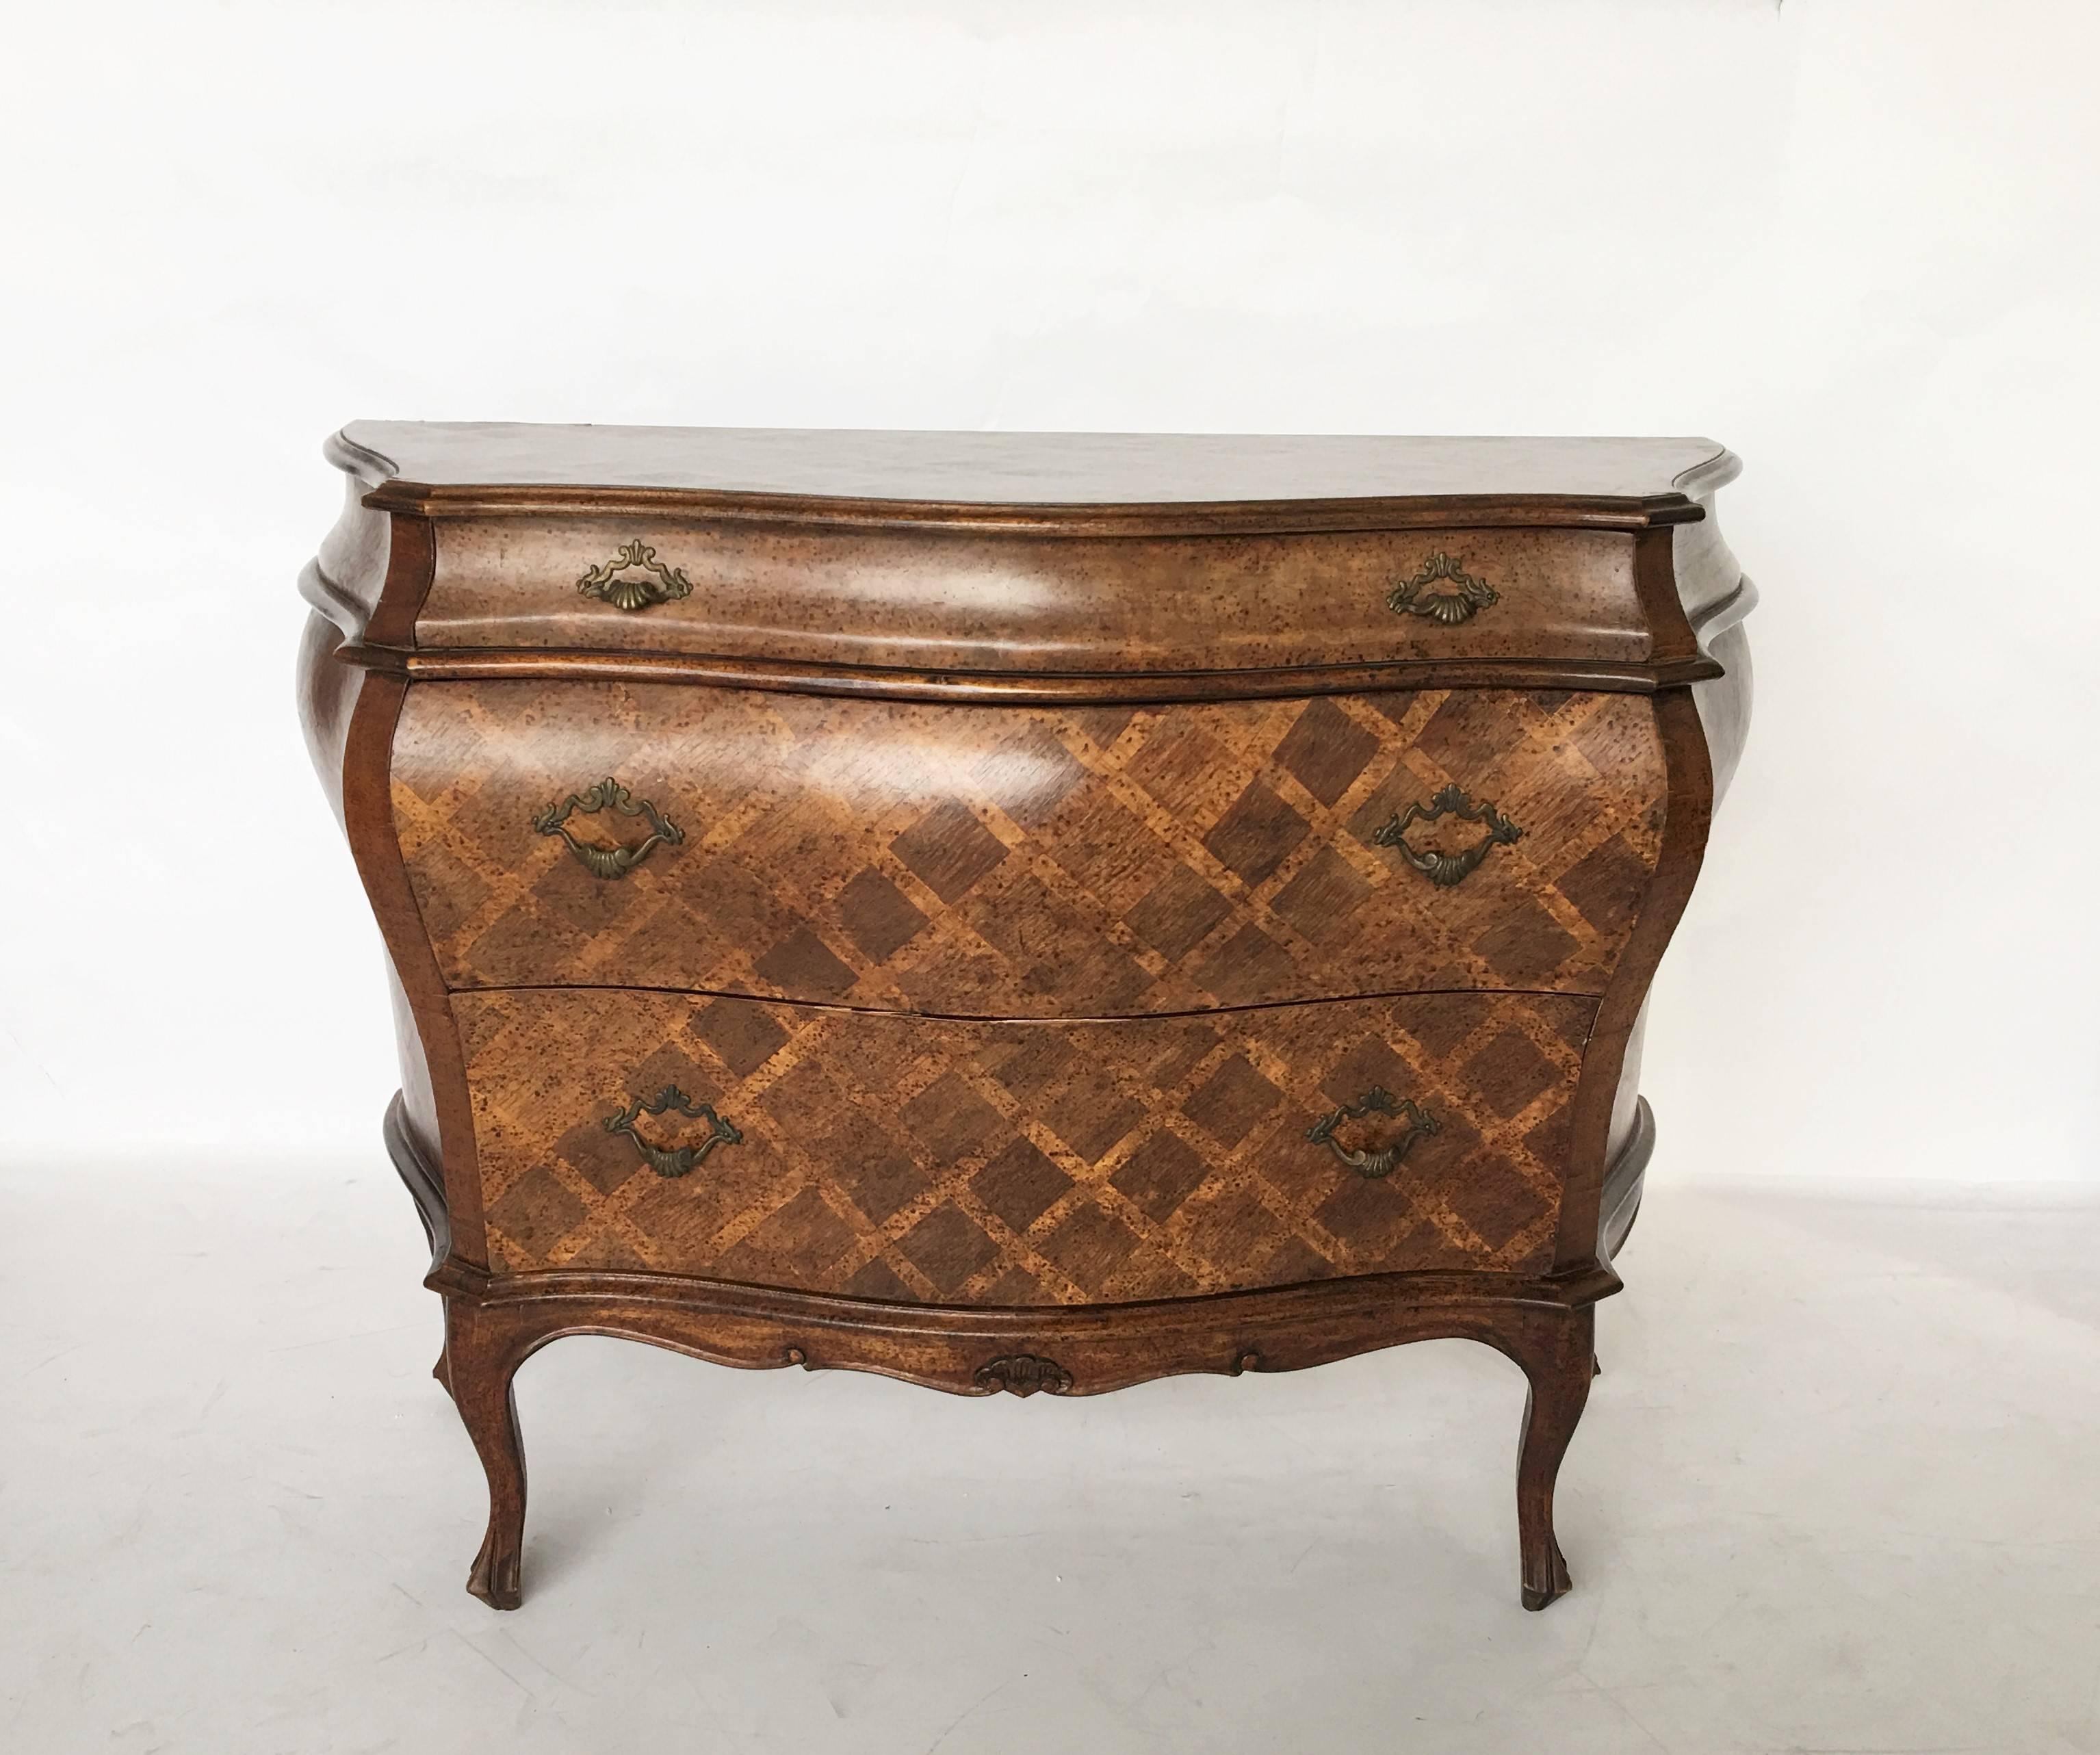 A Rococo style three-drawer Italian bombe commode or chest of drawers with inlaid cross hatch design, sitting on cabriole legs. Exhibiting a stellar patina and great lines.